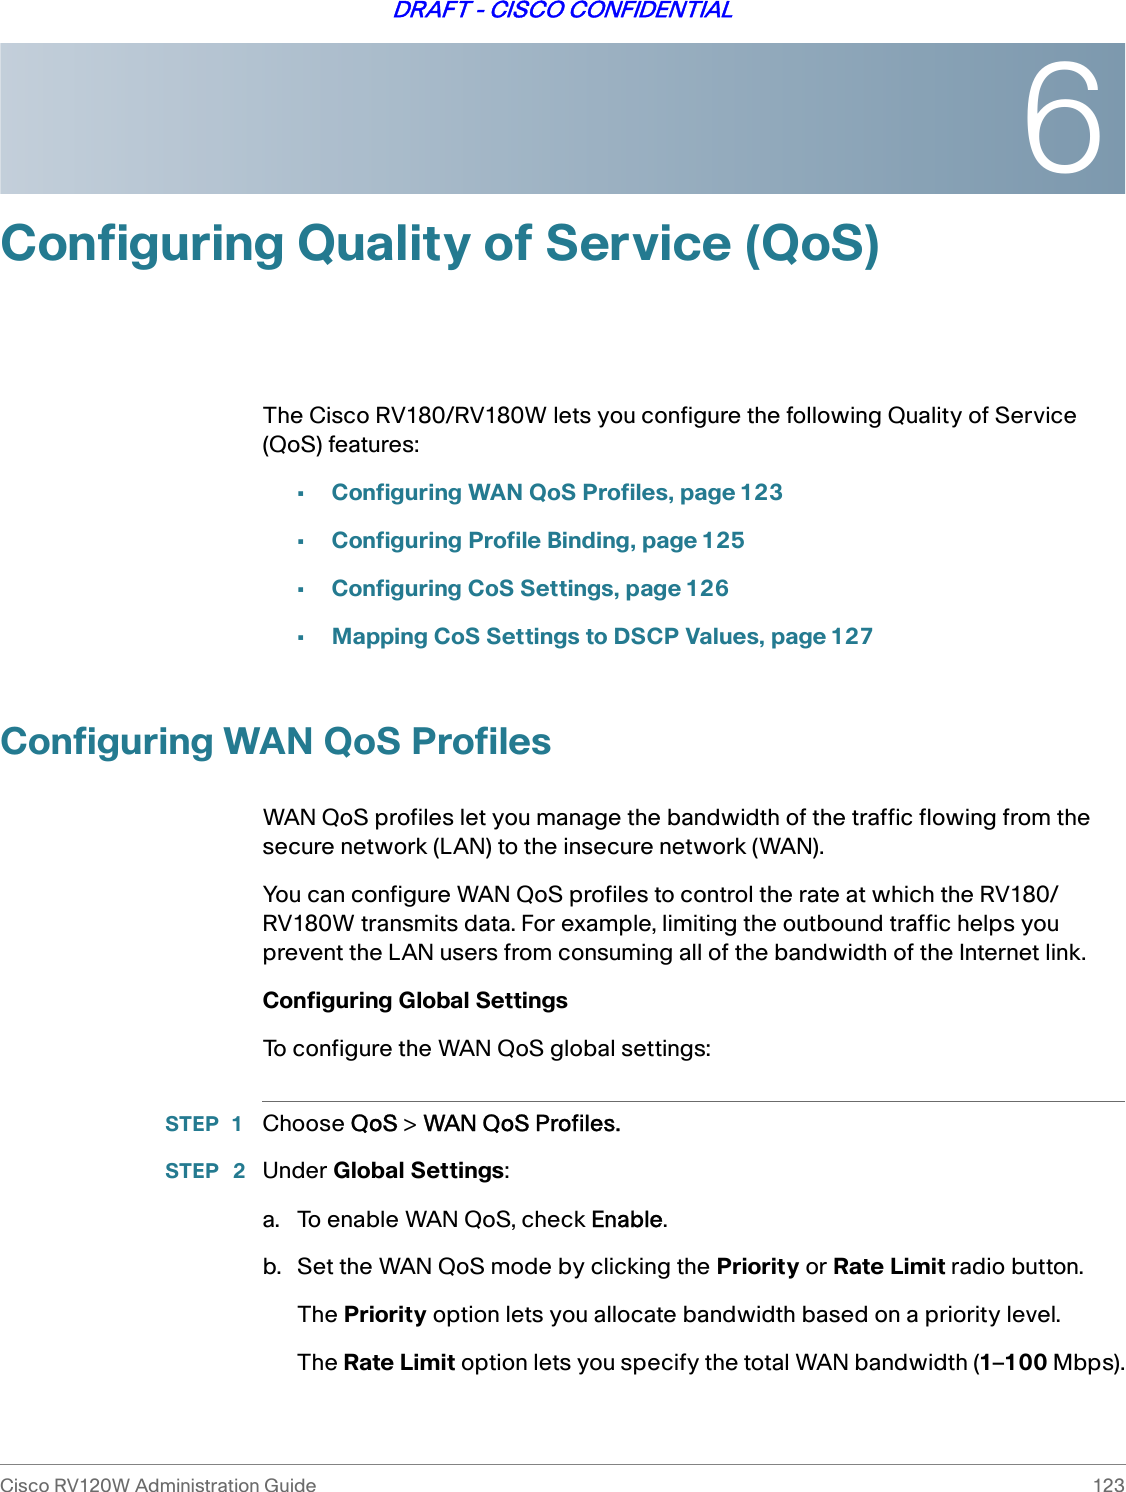 6Cisco RV120W Administration Guide 123DRAFT - CISCO CONFIDENTIALConfiguring Quality of Service (QoS)The Cisco RV180/RV180W lets you configure the following Quality of Service (QoS) features:•Configuring WAN QoS Profiles, page 123•Configuring Profile Binding, page 125•Configuring CoS Settings, page 126•Mapping CoS Settings to DSCP Values, page 127Configuring WAN QoS ProfilesWAN QoS profiles let you manage the bandwidth of the traffic flowing from the secure network (LAN) to the insecure network (WAN). You can configure WAN QoS profiles to control the rate at which the RV180/RV180W transmits data. For example, limiting the outbound traffic helps you prevent the LAN users from consuming all of the bandwidth of the Internet link. Configuring Global SettingsTo configure the WAN QoS global settings:STEP 1 Choose QoS &gt; WAN QoS Profiles.STEP  2 Under Global Settings:a. To enable WAN QoS, check Enable.b. Set the WAN QoS mode by clicking the Priority or Rate Limit radio button.The Priority option lets you allocate bandwidth based on a priority level. The Rate Limit option lets you specify the total WAN bandwidth (1–100 Mbps).